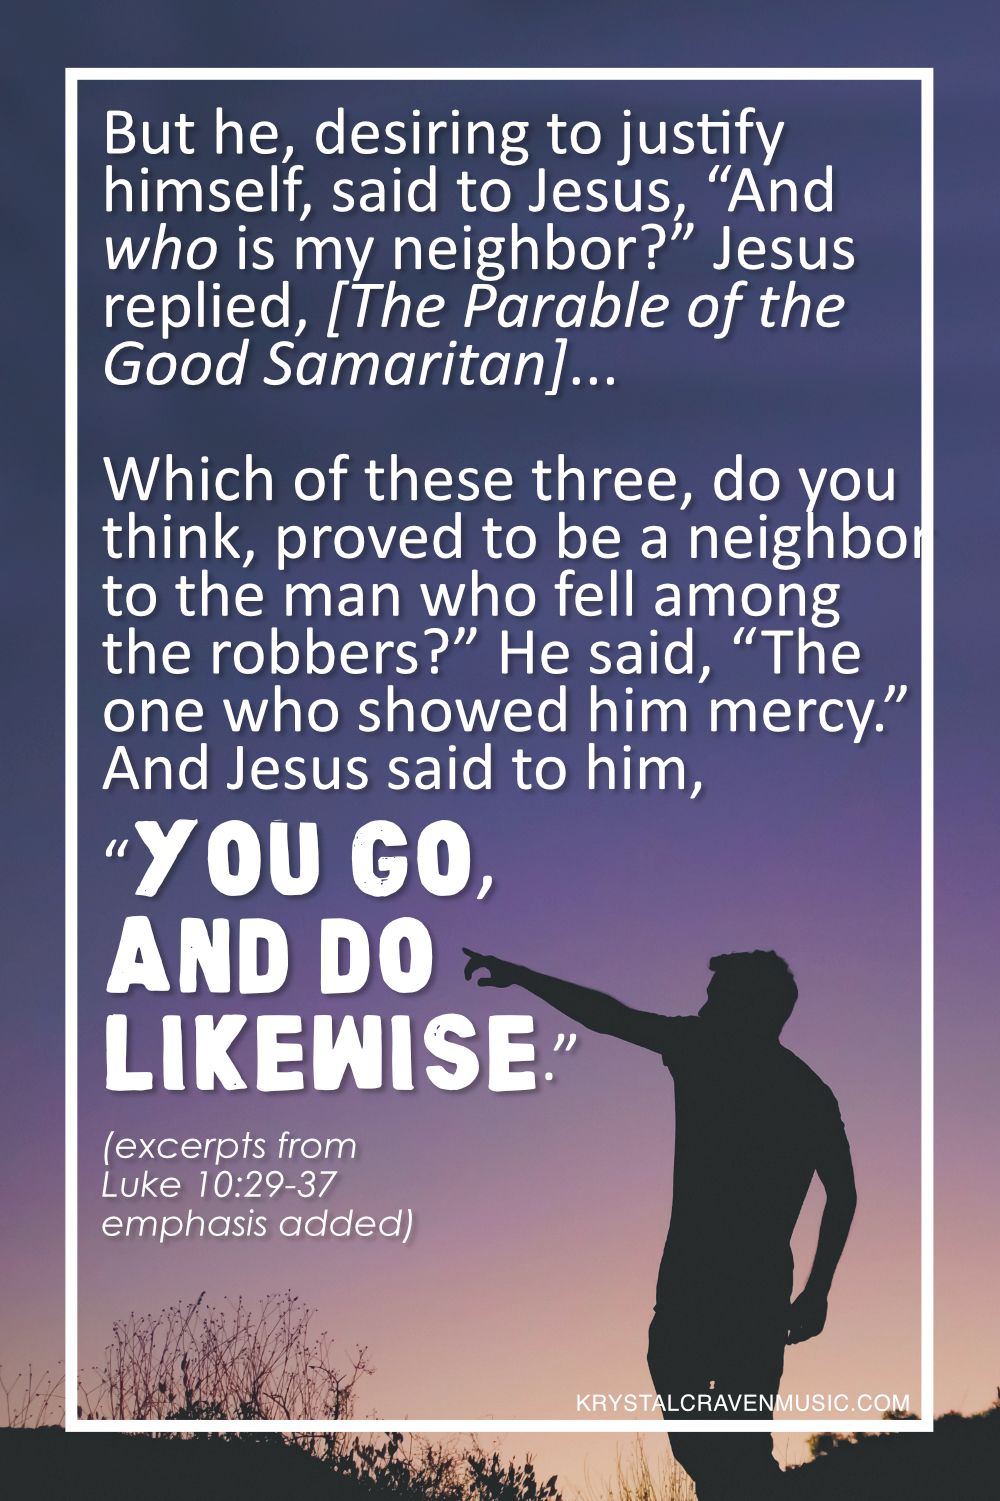 Excerpts from Luke 10:29-37 "But he, desiring to justify himself, said to Jesus, “And who is my neighbor?” Jesus replied, [The Parable of the Good Samaritan]... Which of these three, do you think, proved to be a neighbor to the man who fell among the robbers?” He said, “The one who showed him mercy.” And Jesus said to him, “You go, and do likewise.”" in a white font above a silhoutte of a man pointing out into the distance.